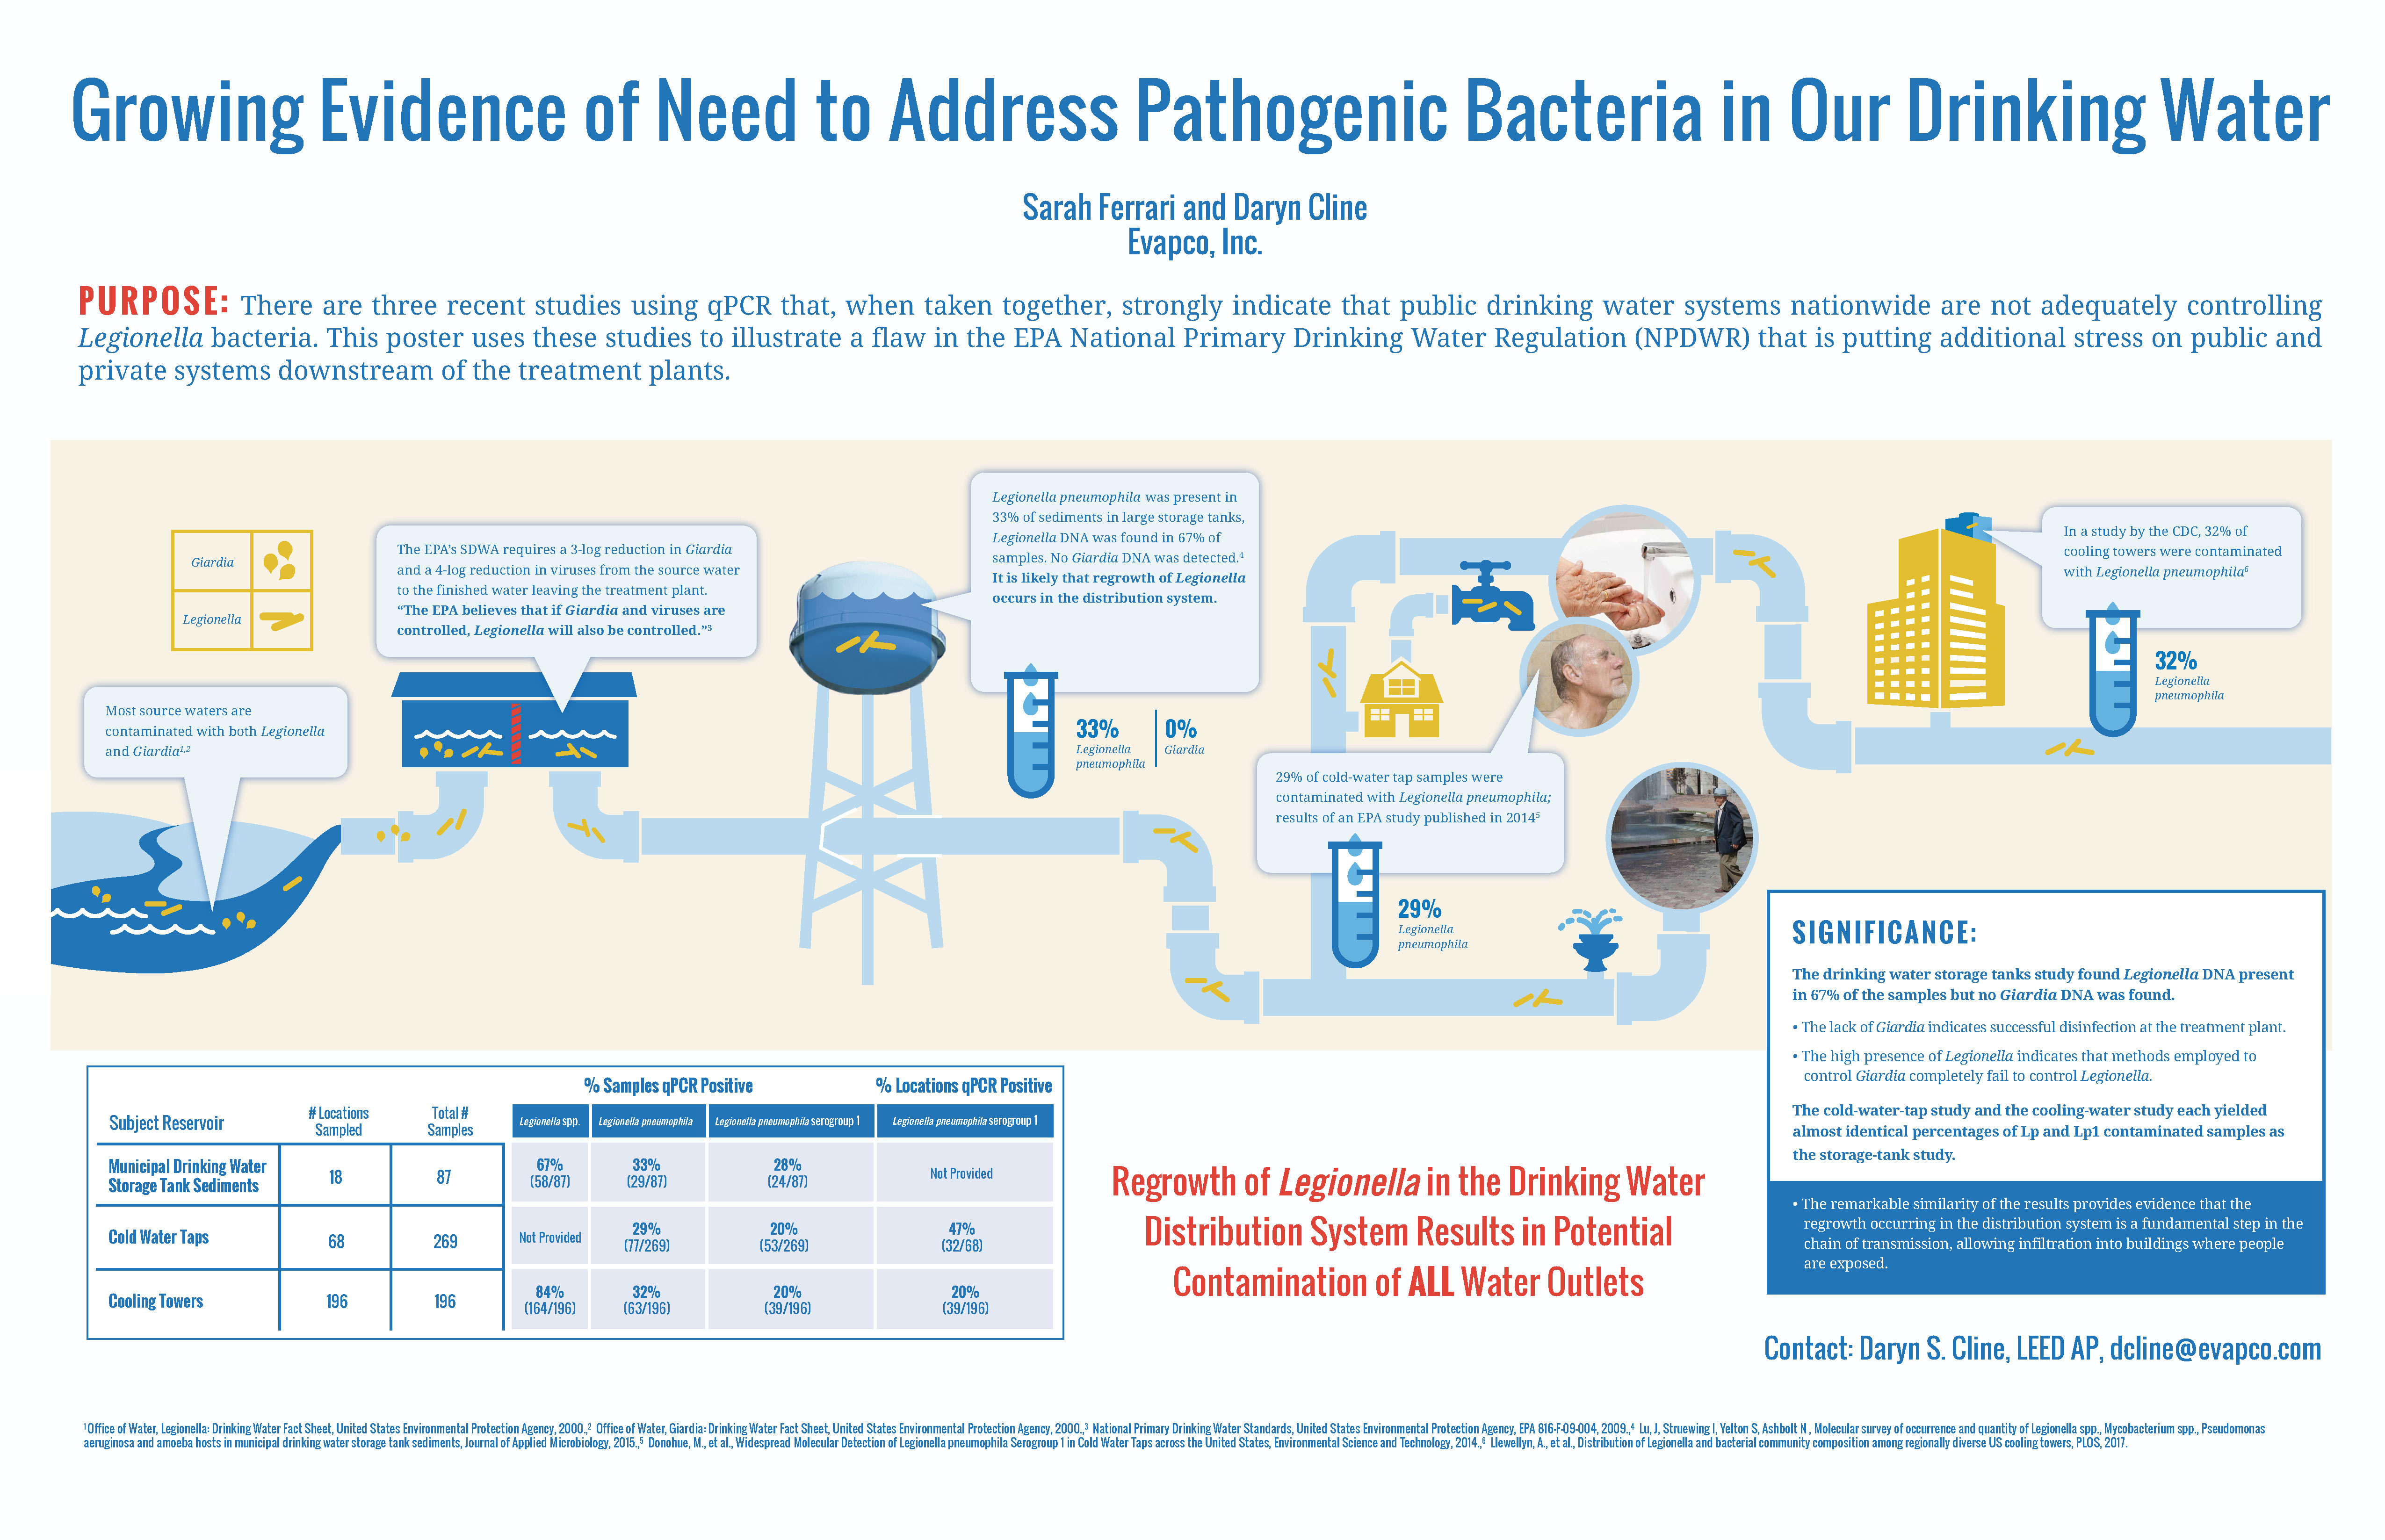 Infographic Pertaining to Legionella Distribution in Drinking Water Systems